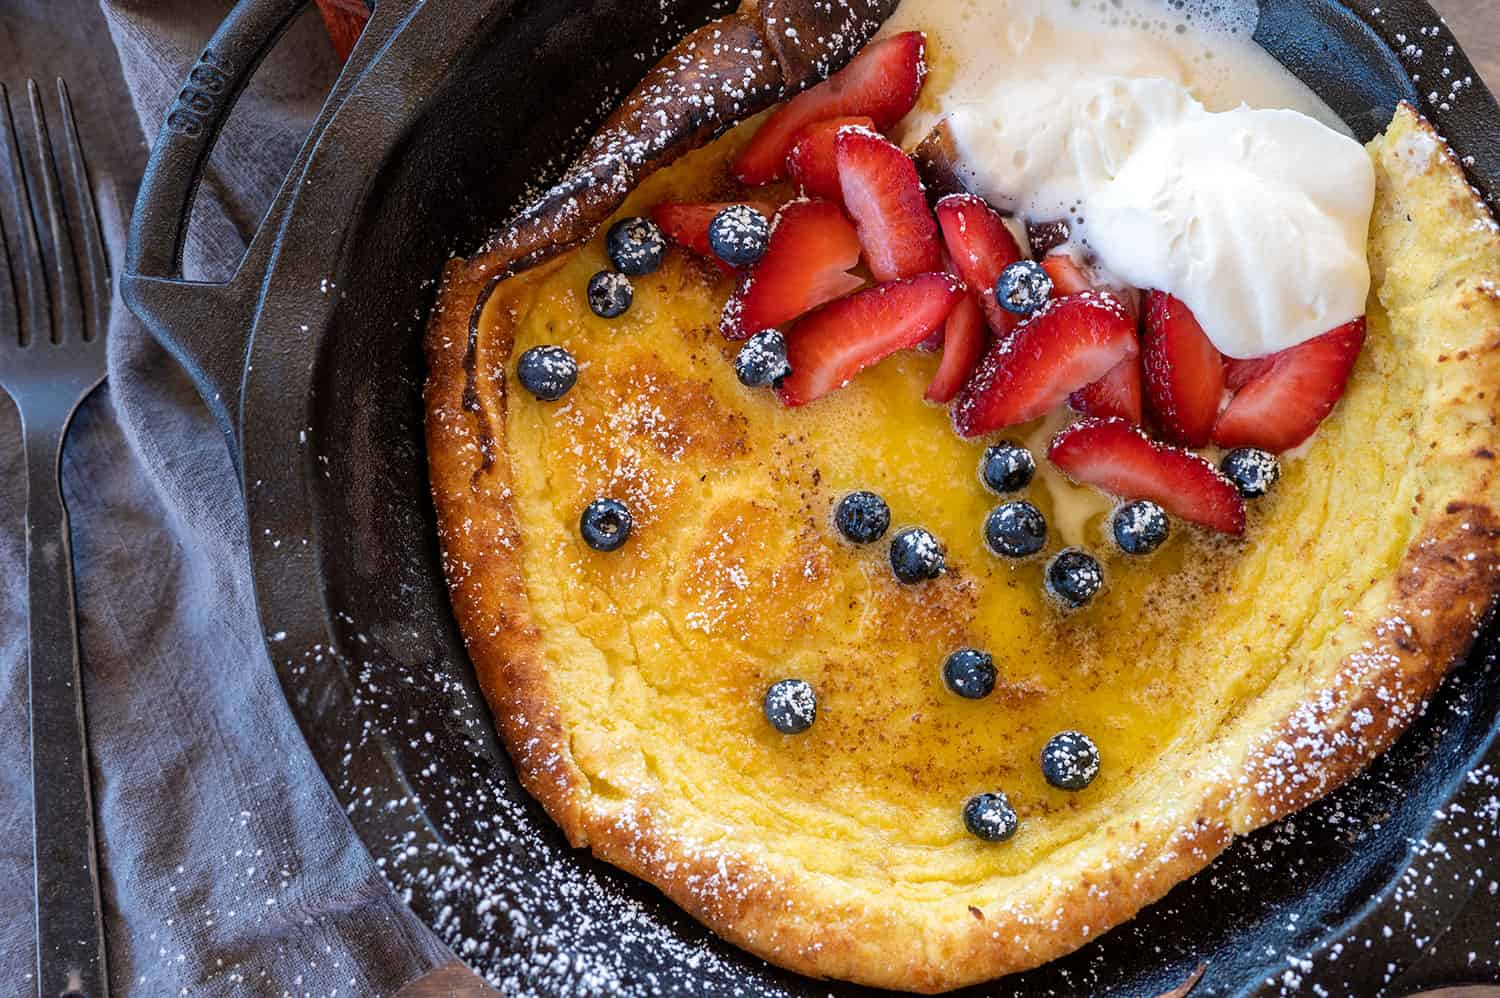 Dutch baby pancake topped with blueberries, strawberries and cream.